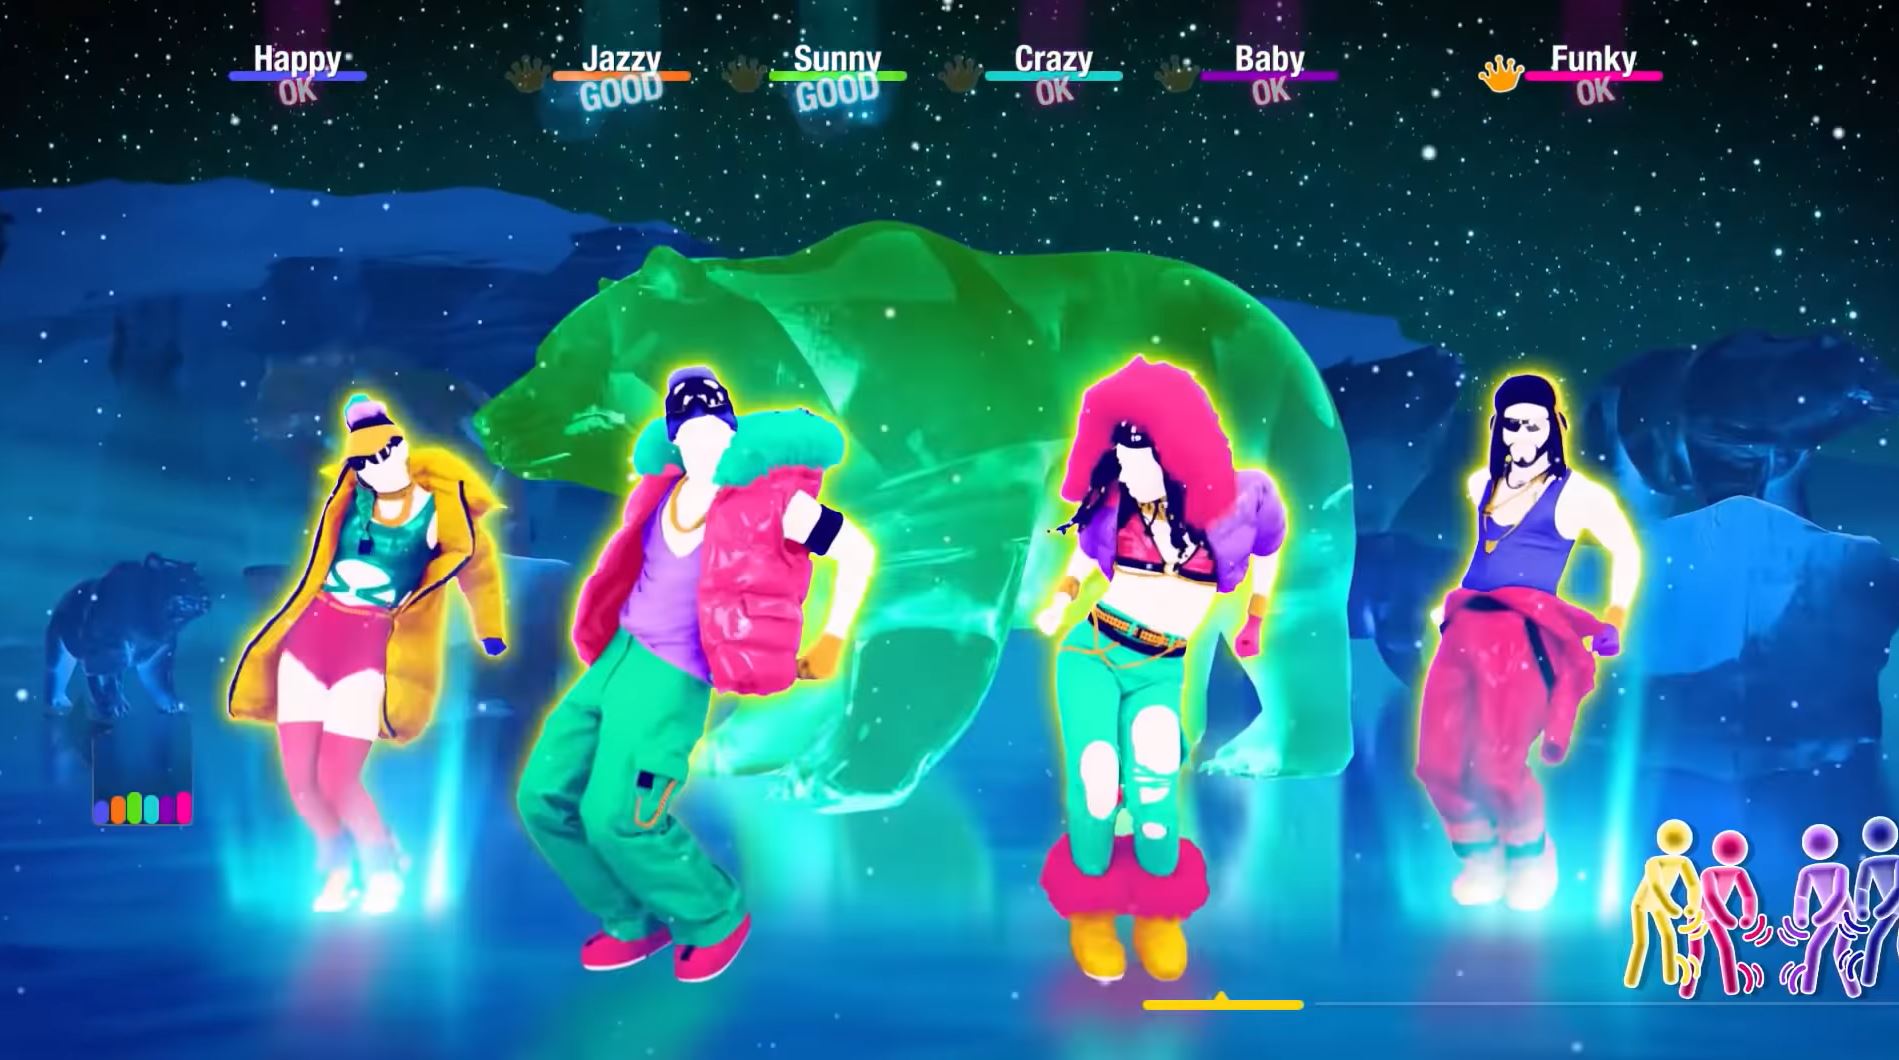 Just Dance 2021 Announced For November Release, Available On PS5